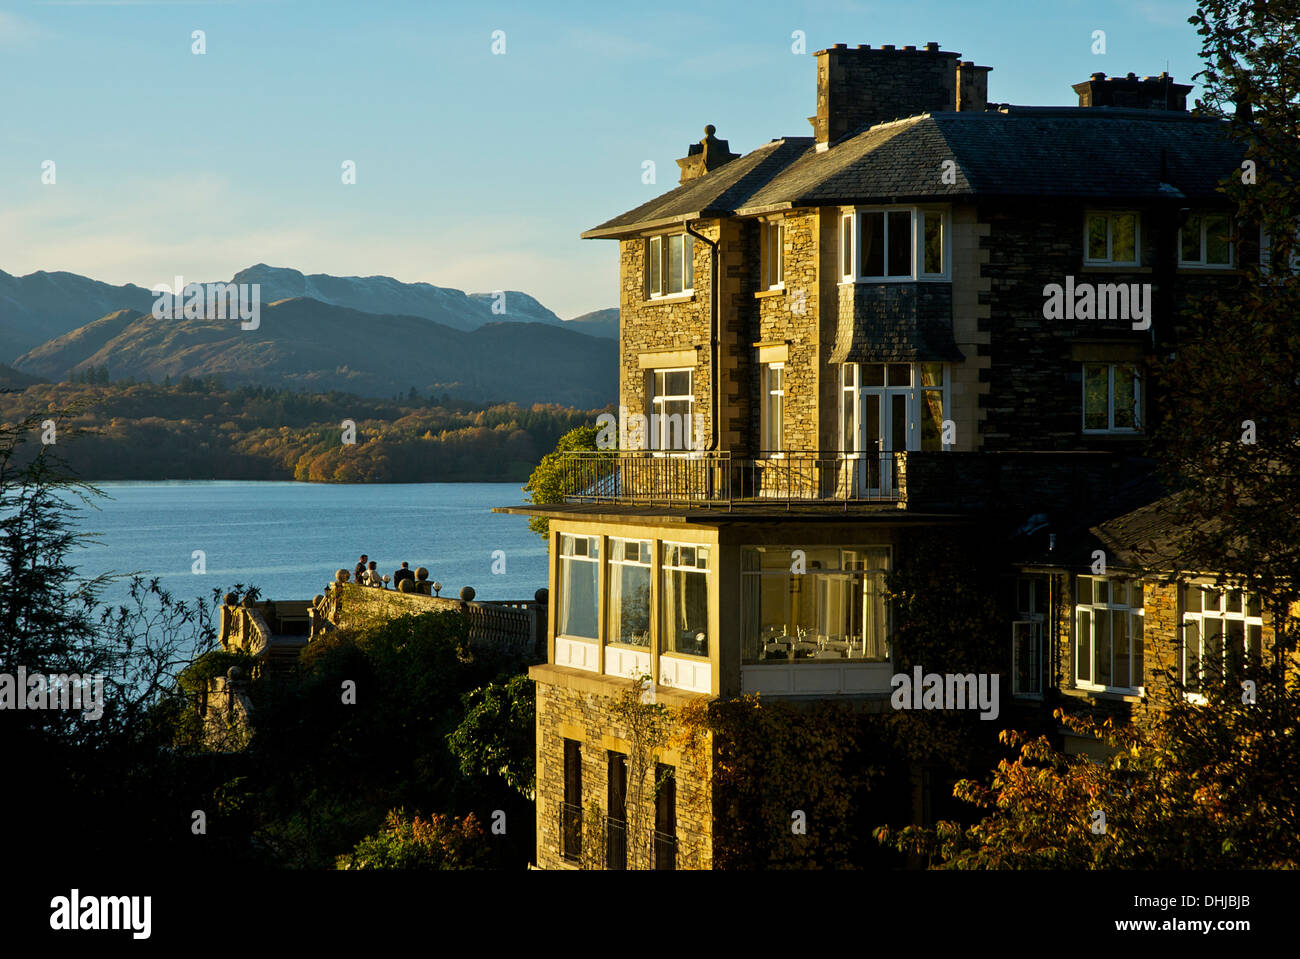 Langdale Chase Hotel on A591, overlooking Lake Windermere, Lake District National Park, Cumbria, England UK Stock Photo